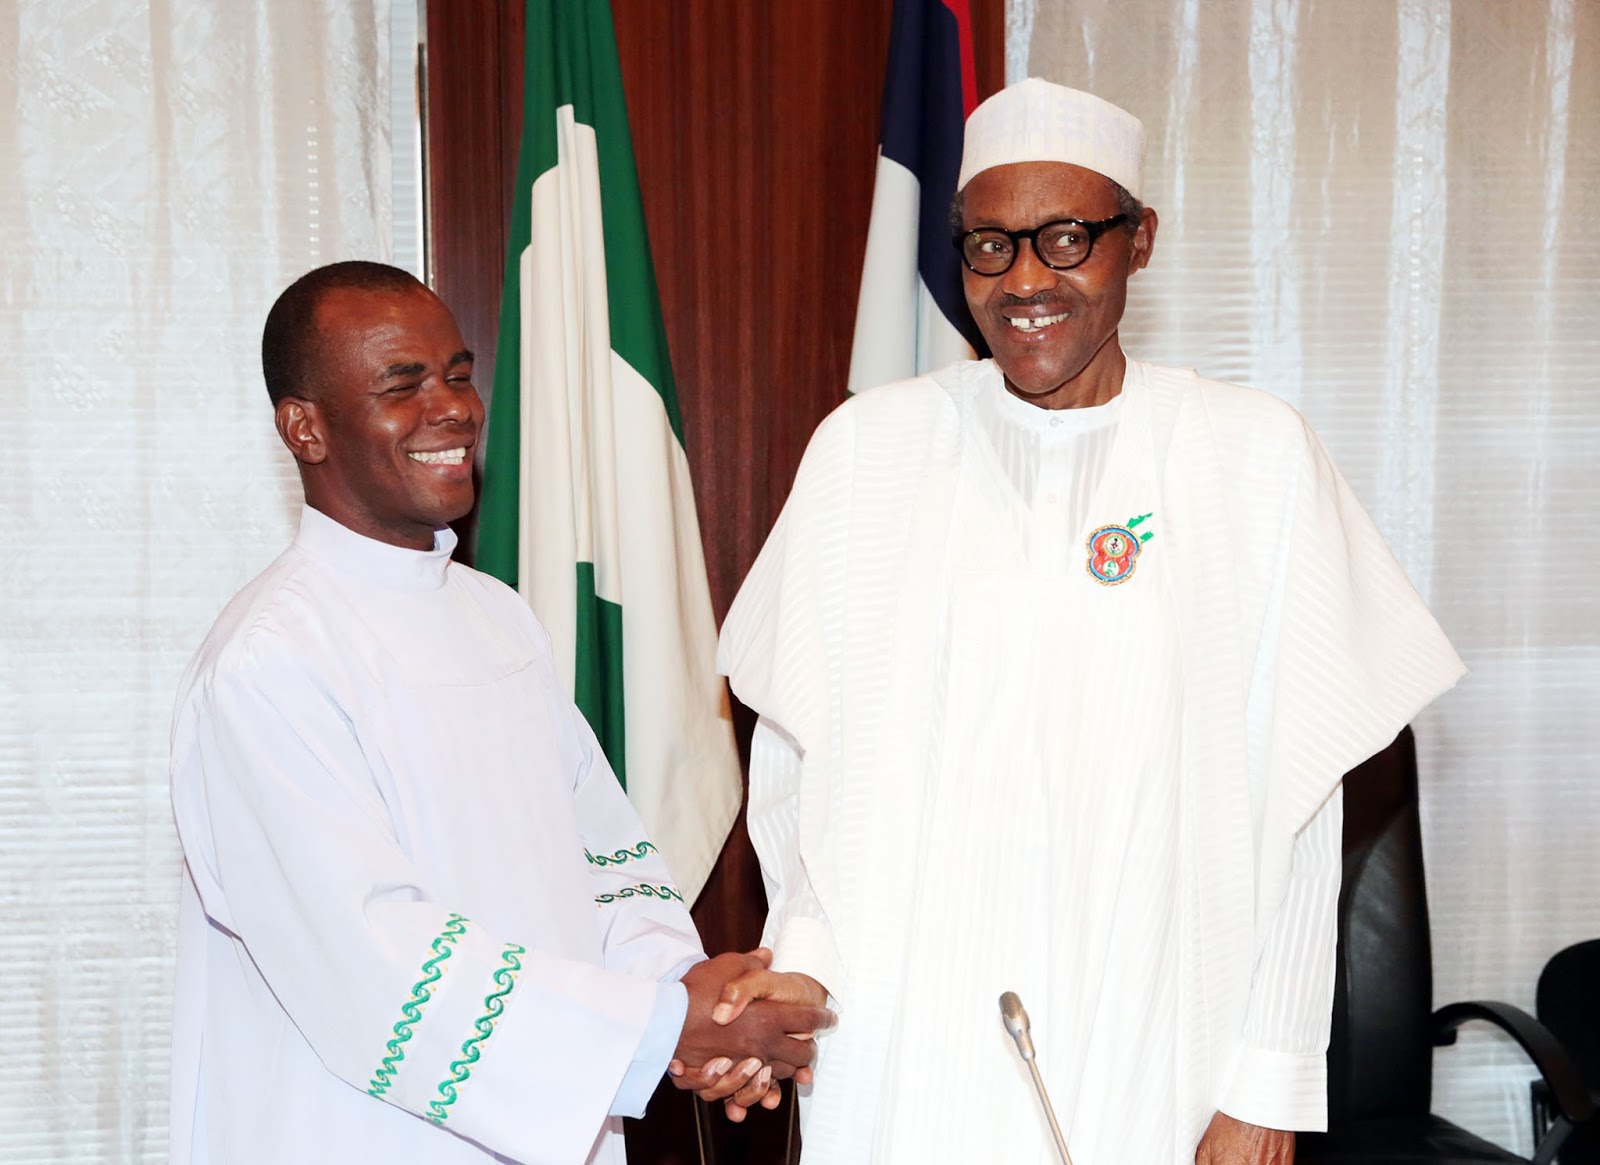 Less Than 24 Hours After Fr. Mbaka’s Prophecy On President Buhari, Nigerians Reacts